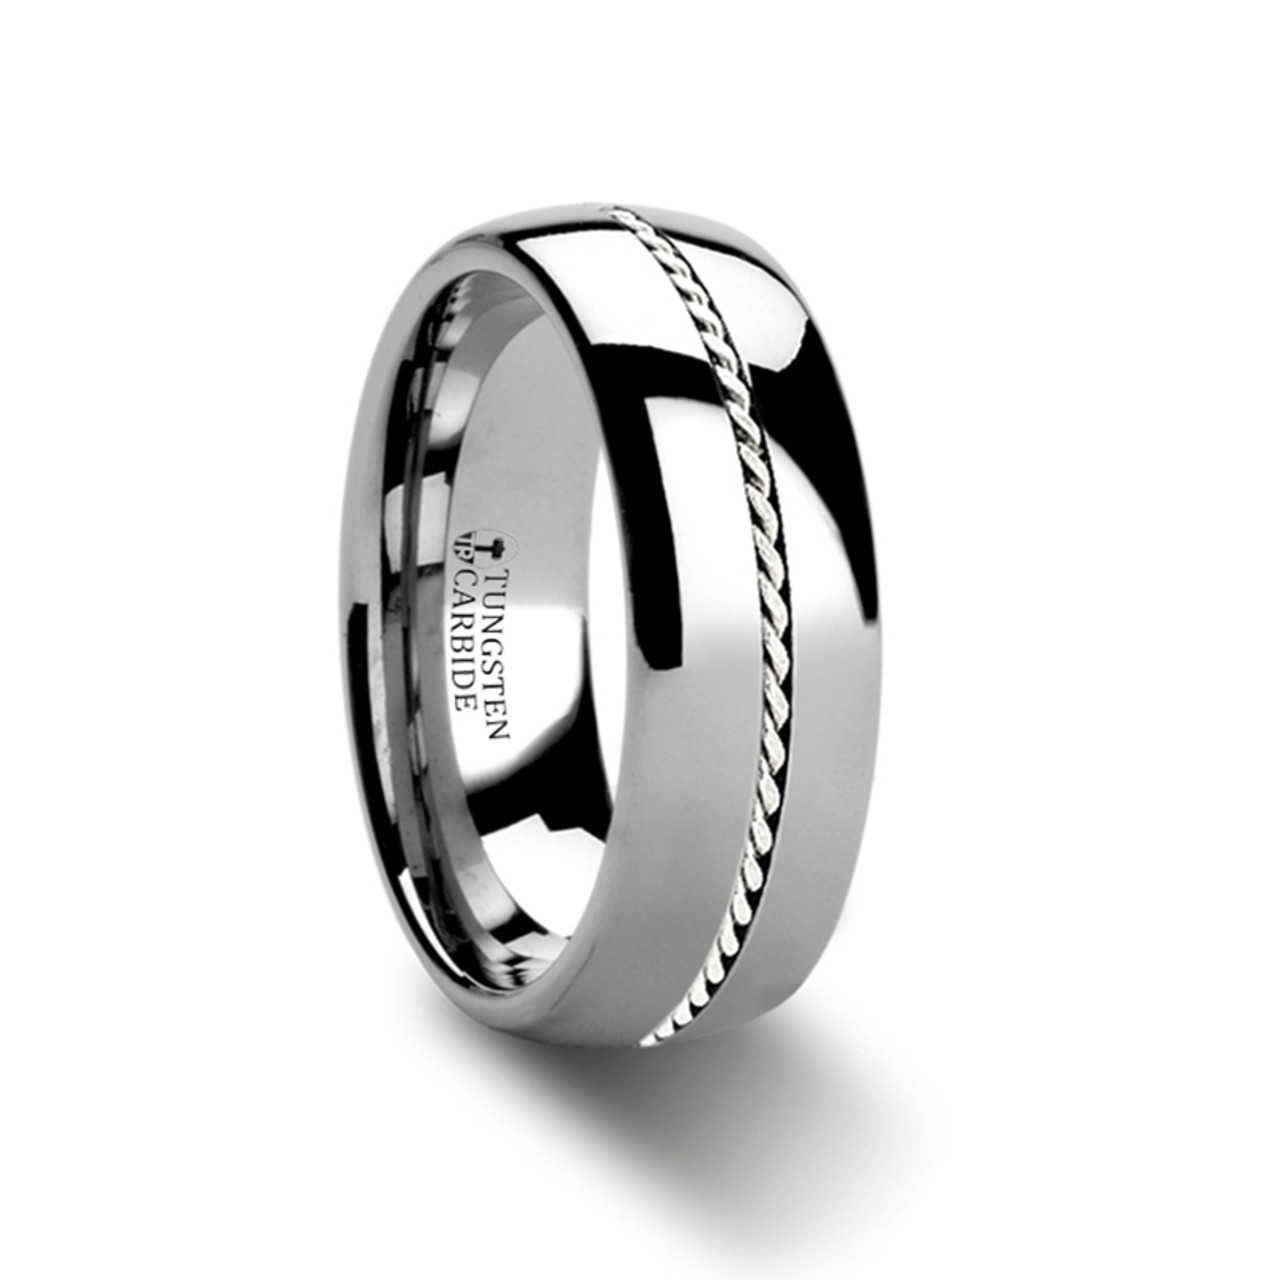 Thorsten Photon Tungsten Ring Wedding Band with Beveled Edges and Green Blue Opal Inlay from Roy Rose Jewelry